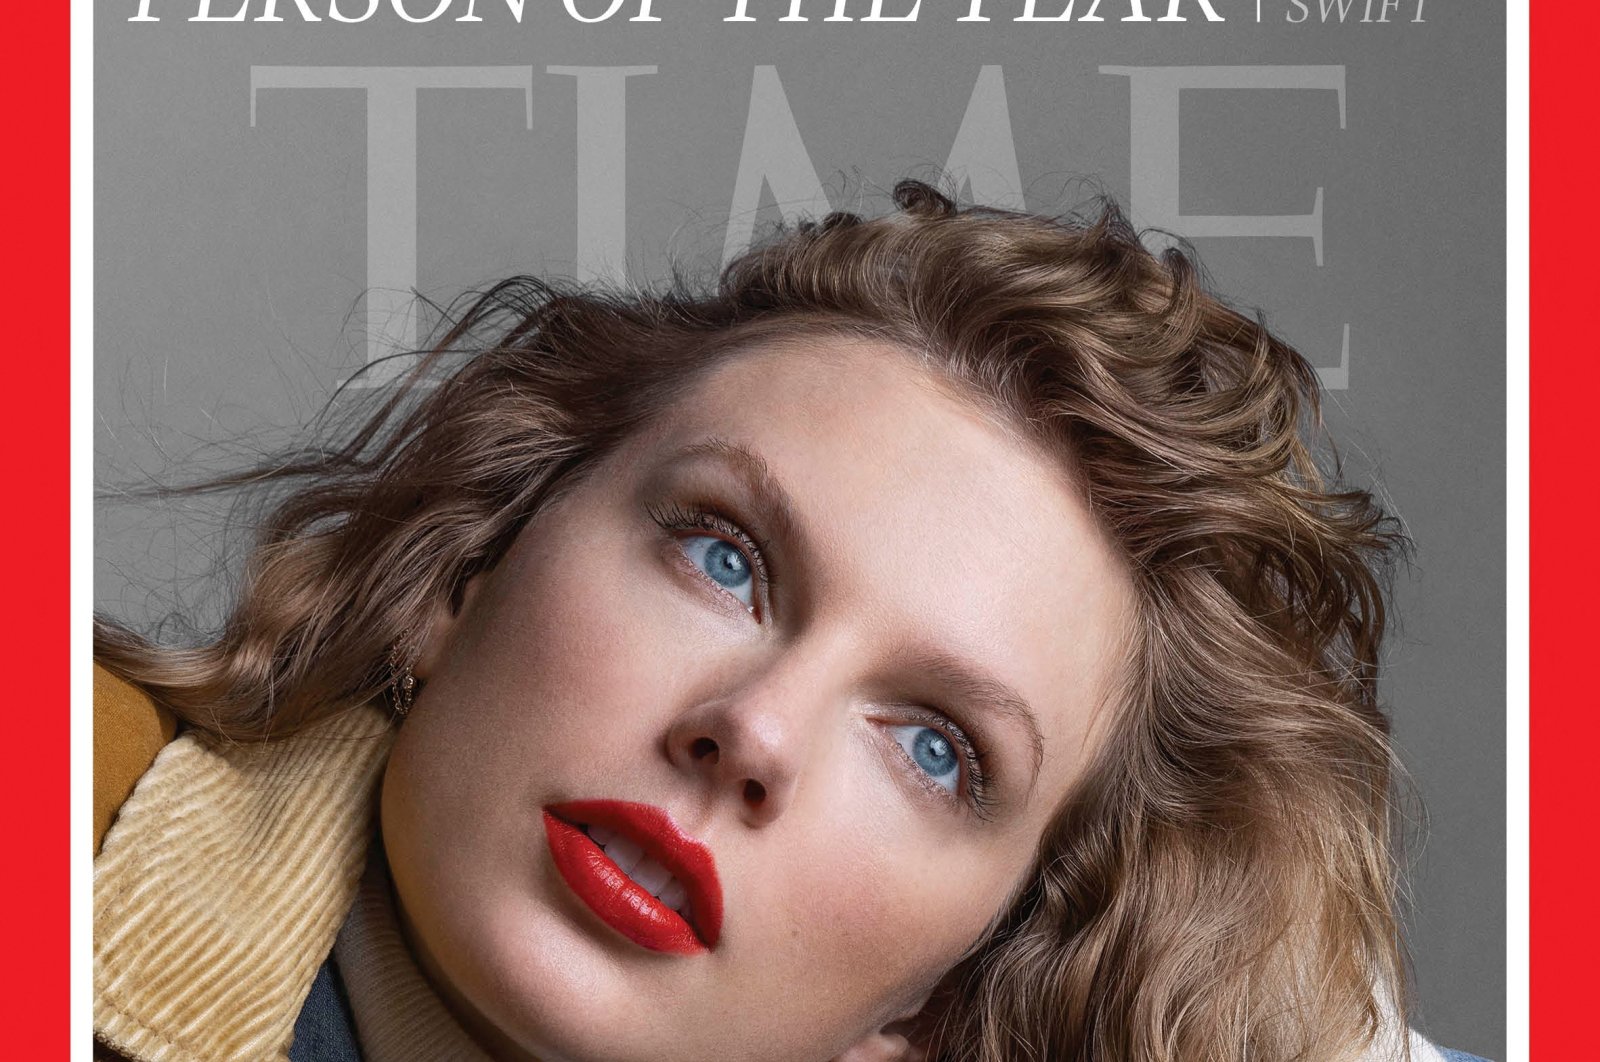 TIME Magazine announced Taylor Swift as its 'Person of the Year